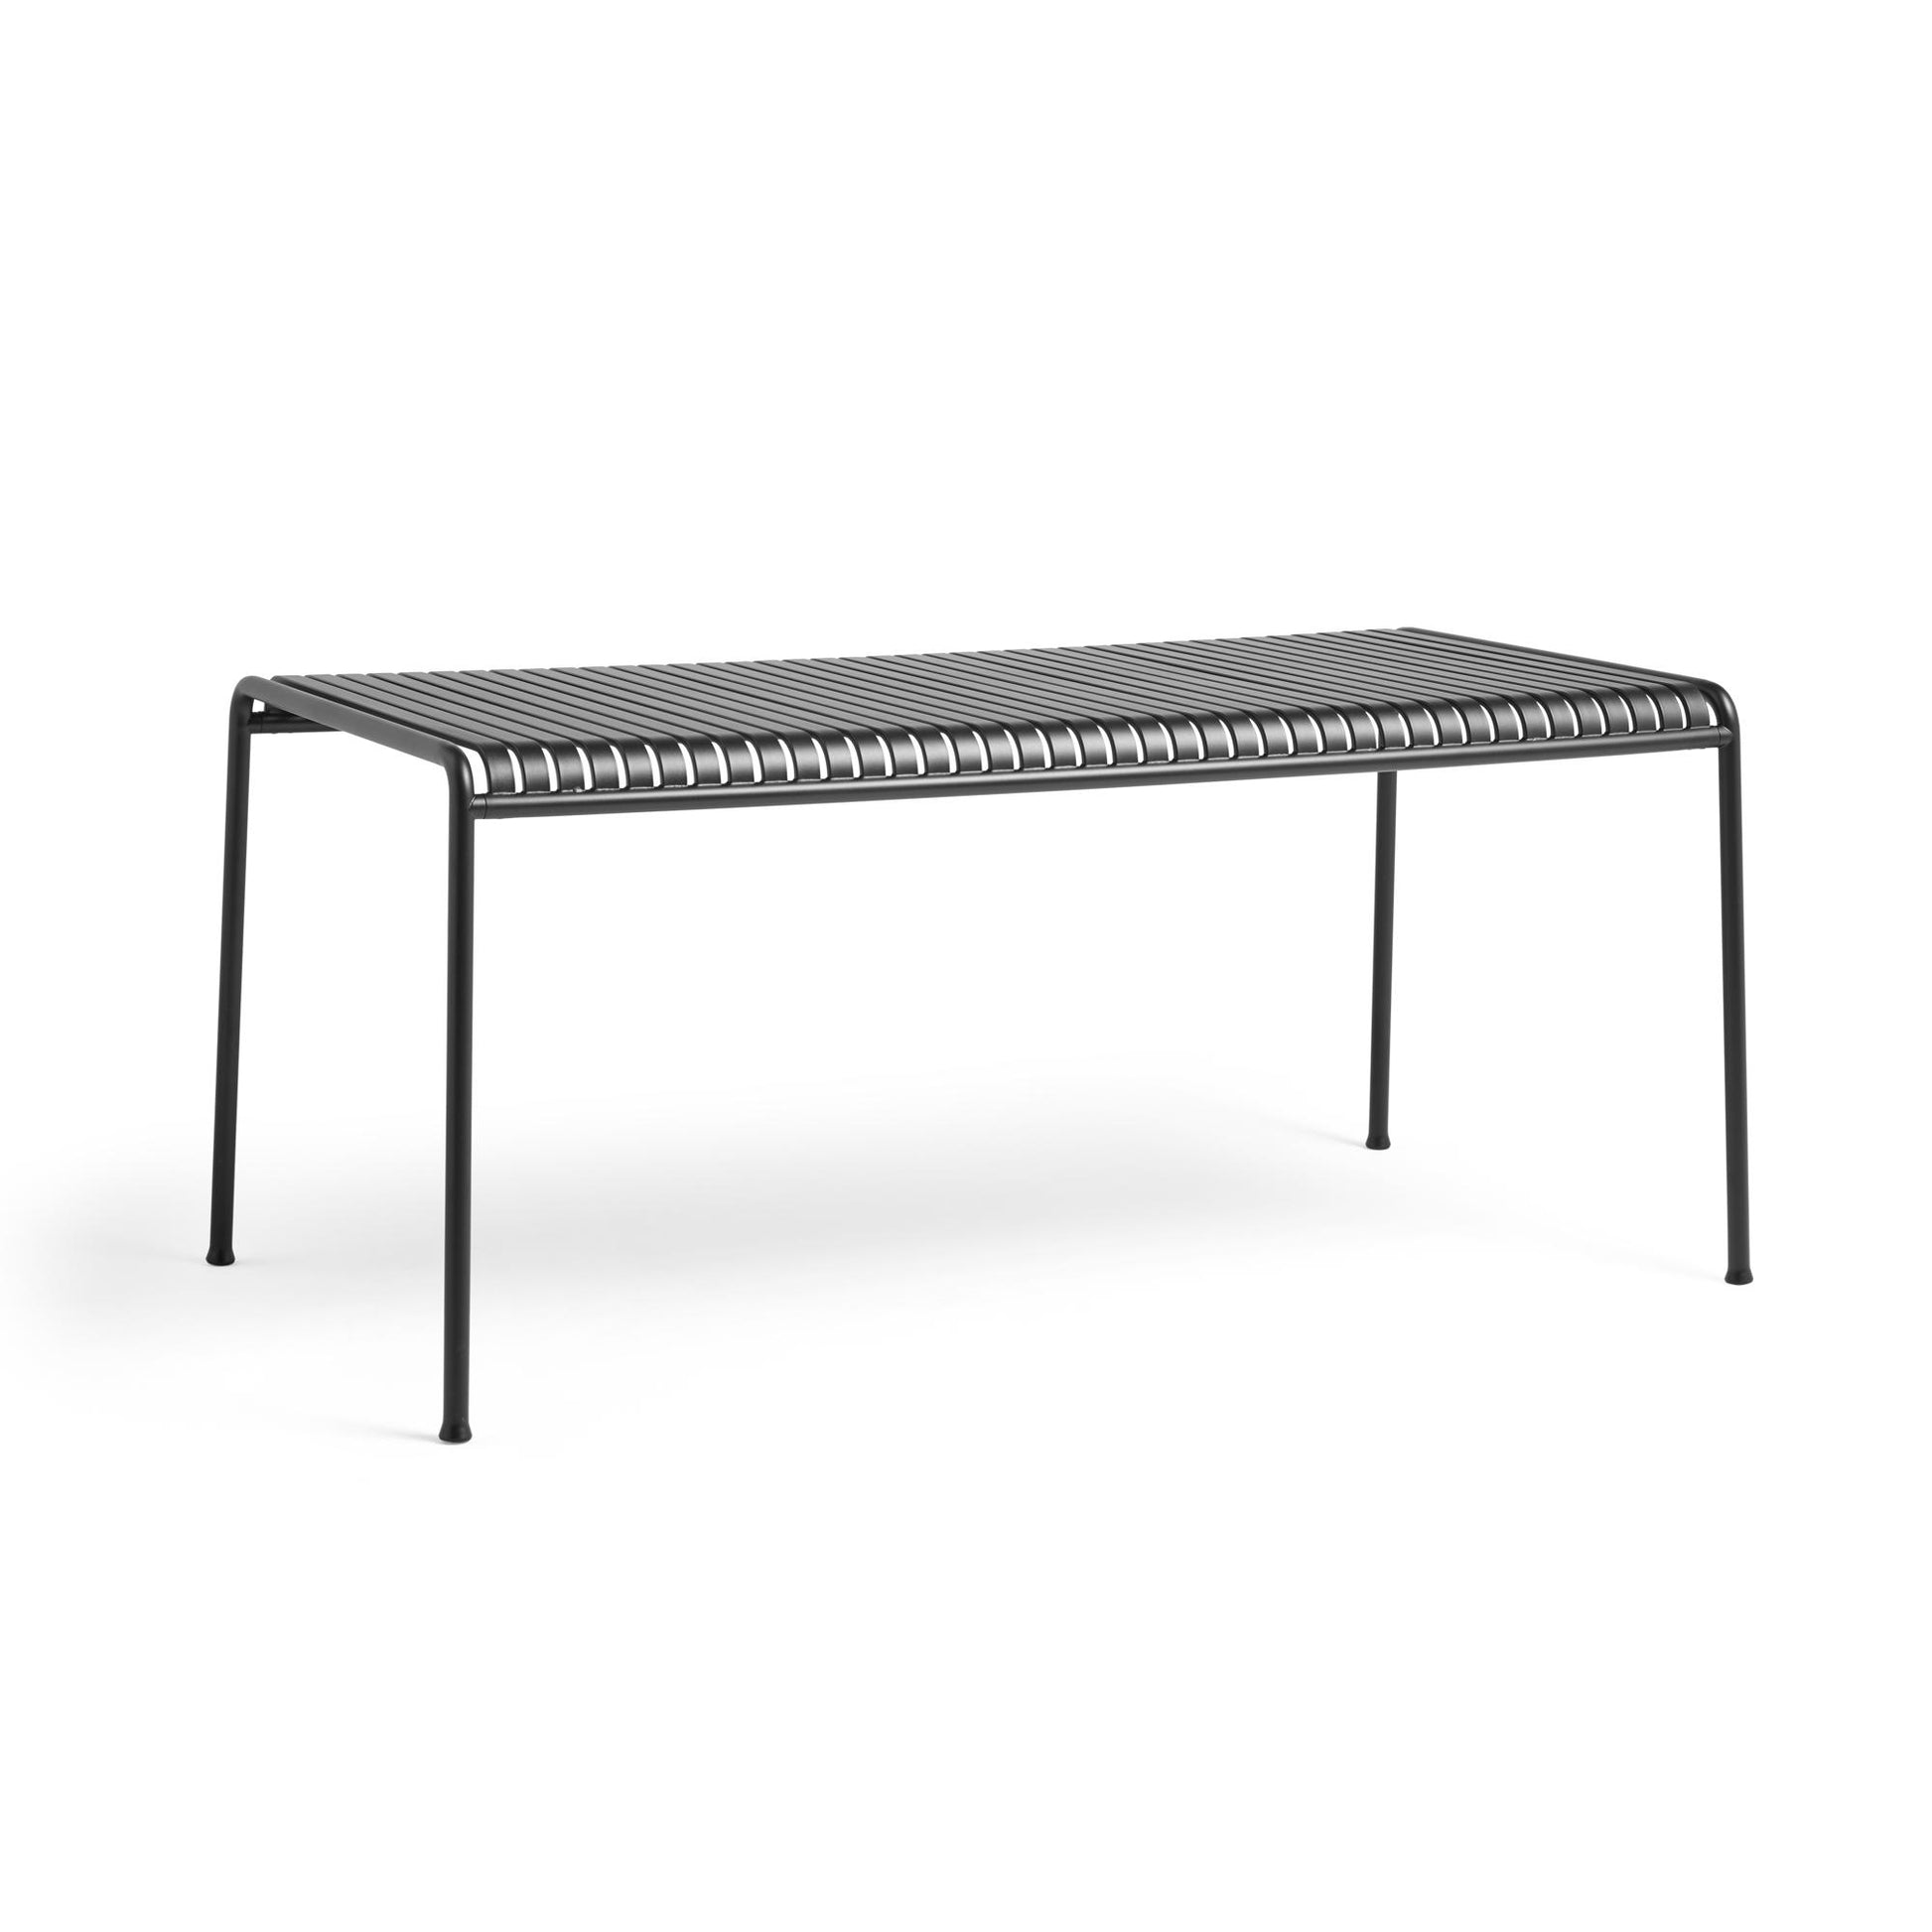 Palissade Table L170 by HAY #Anthracite